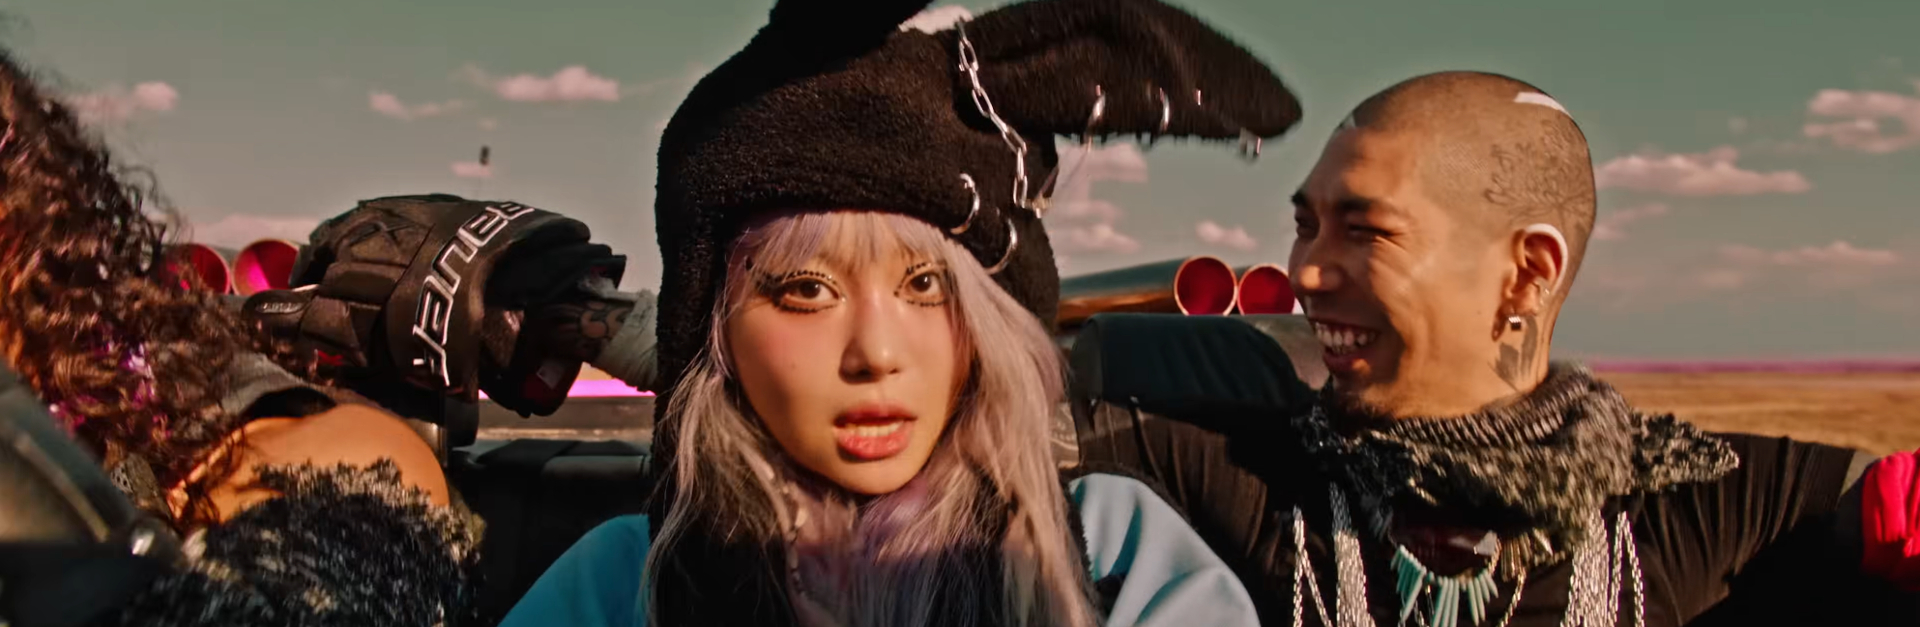 Jvcki Wai with a black bunny ear hat in the backseat of a car. A guy smiling to her right has a buzz cut and tree tattoo on the side of his head.